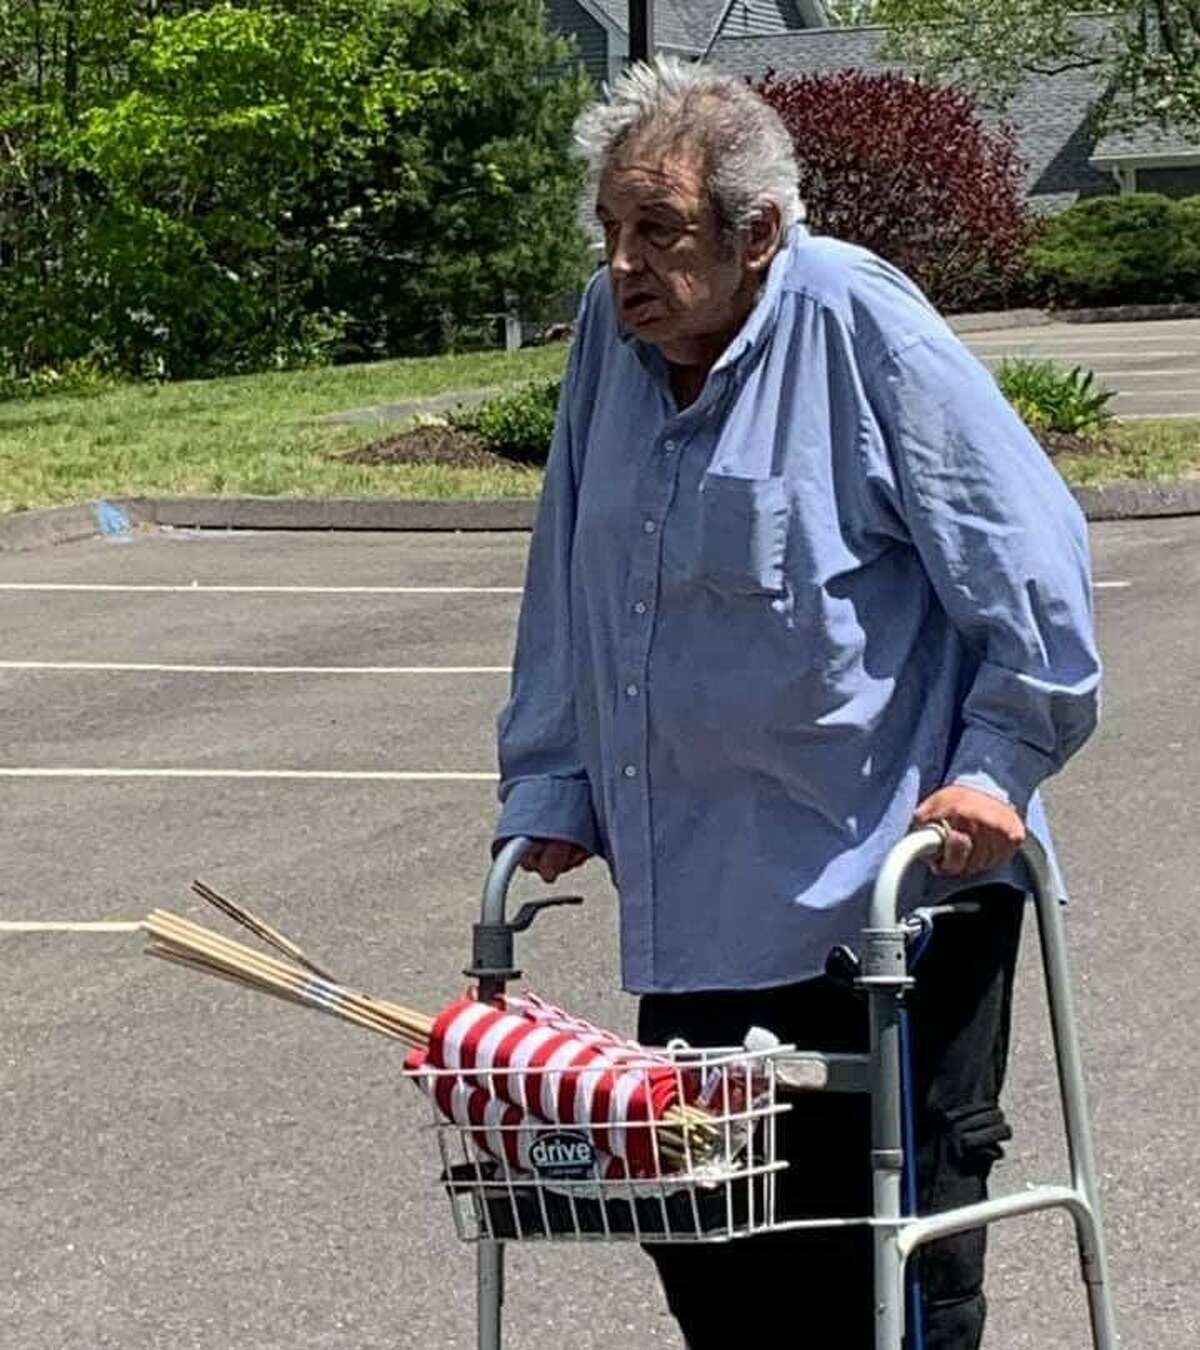 Joseph Bennetta spent the days prior to Memorial Day walking around the Meadow Lake Condominium complex in which he lives, placing American flags at each home.